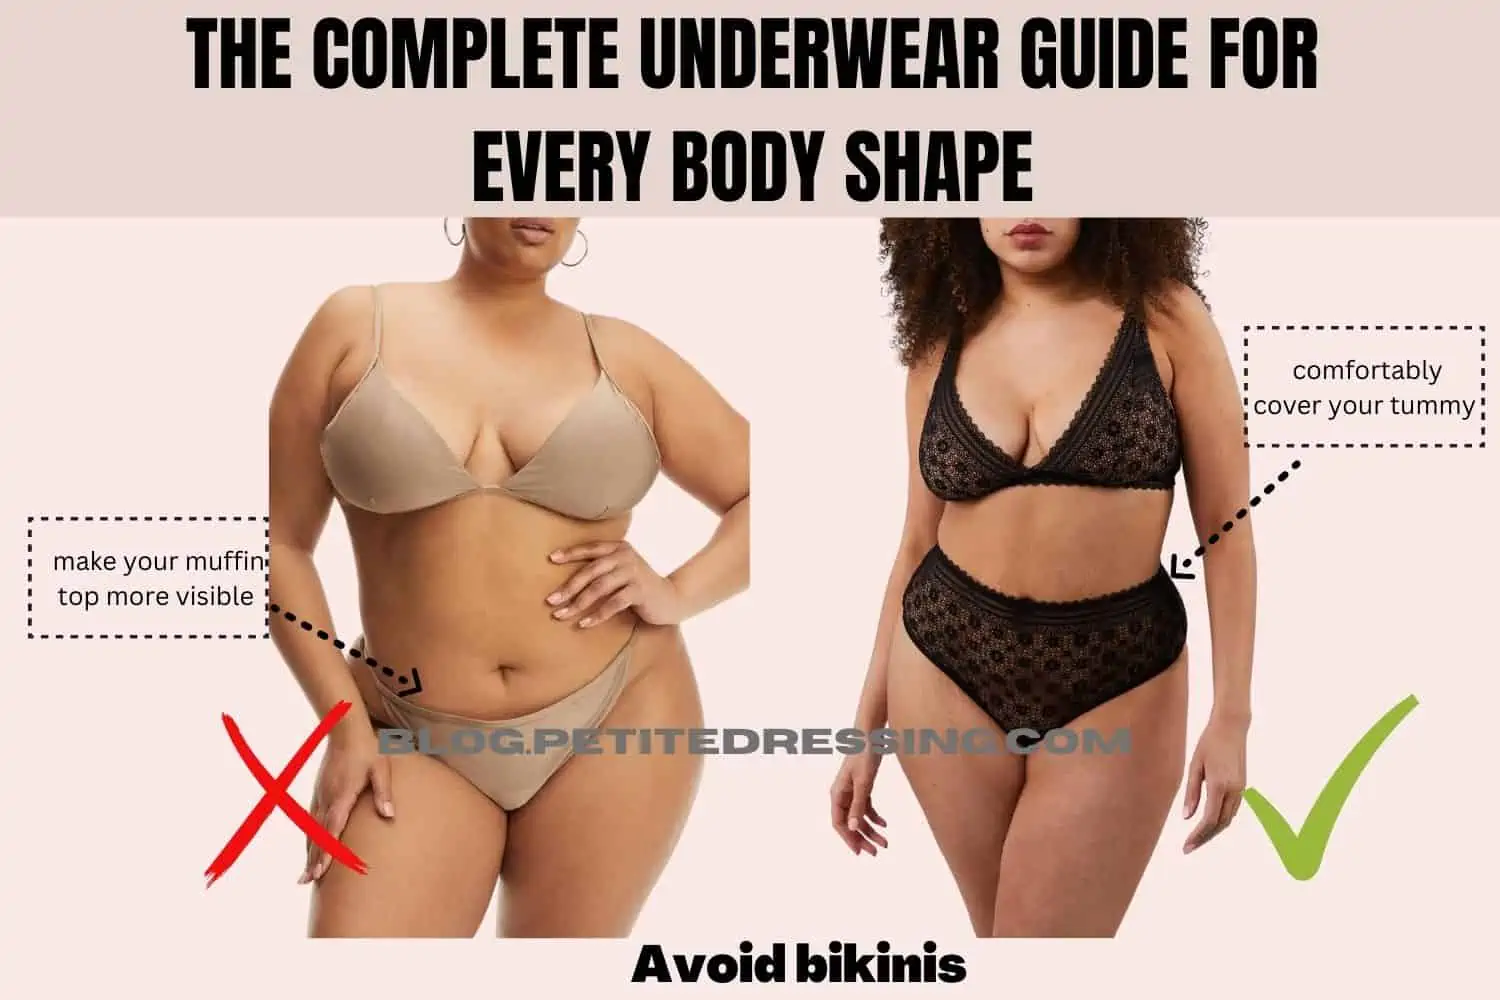 Plus Size Lingerie Made To Celebrate Your Body